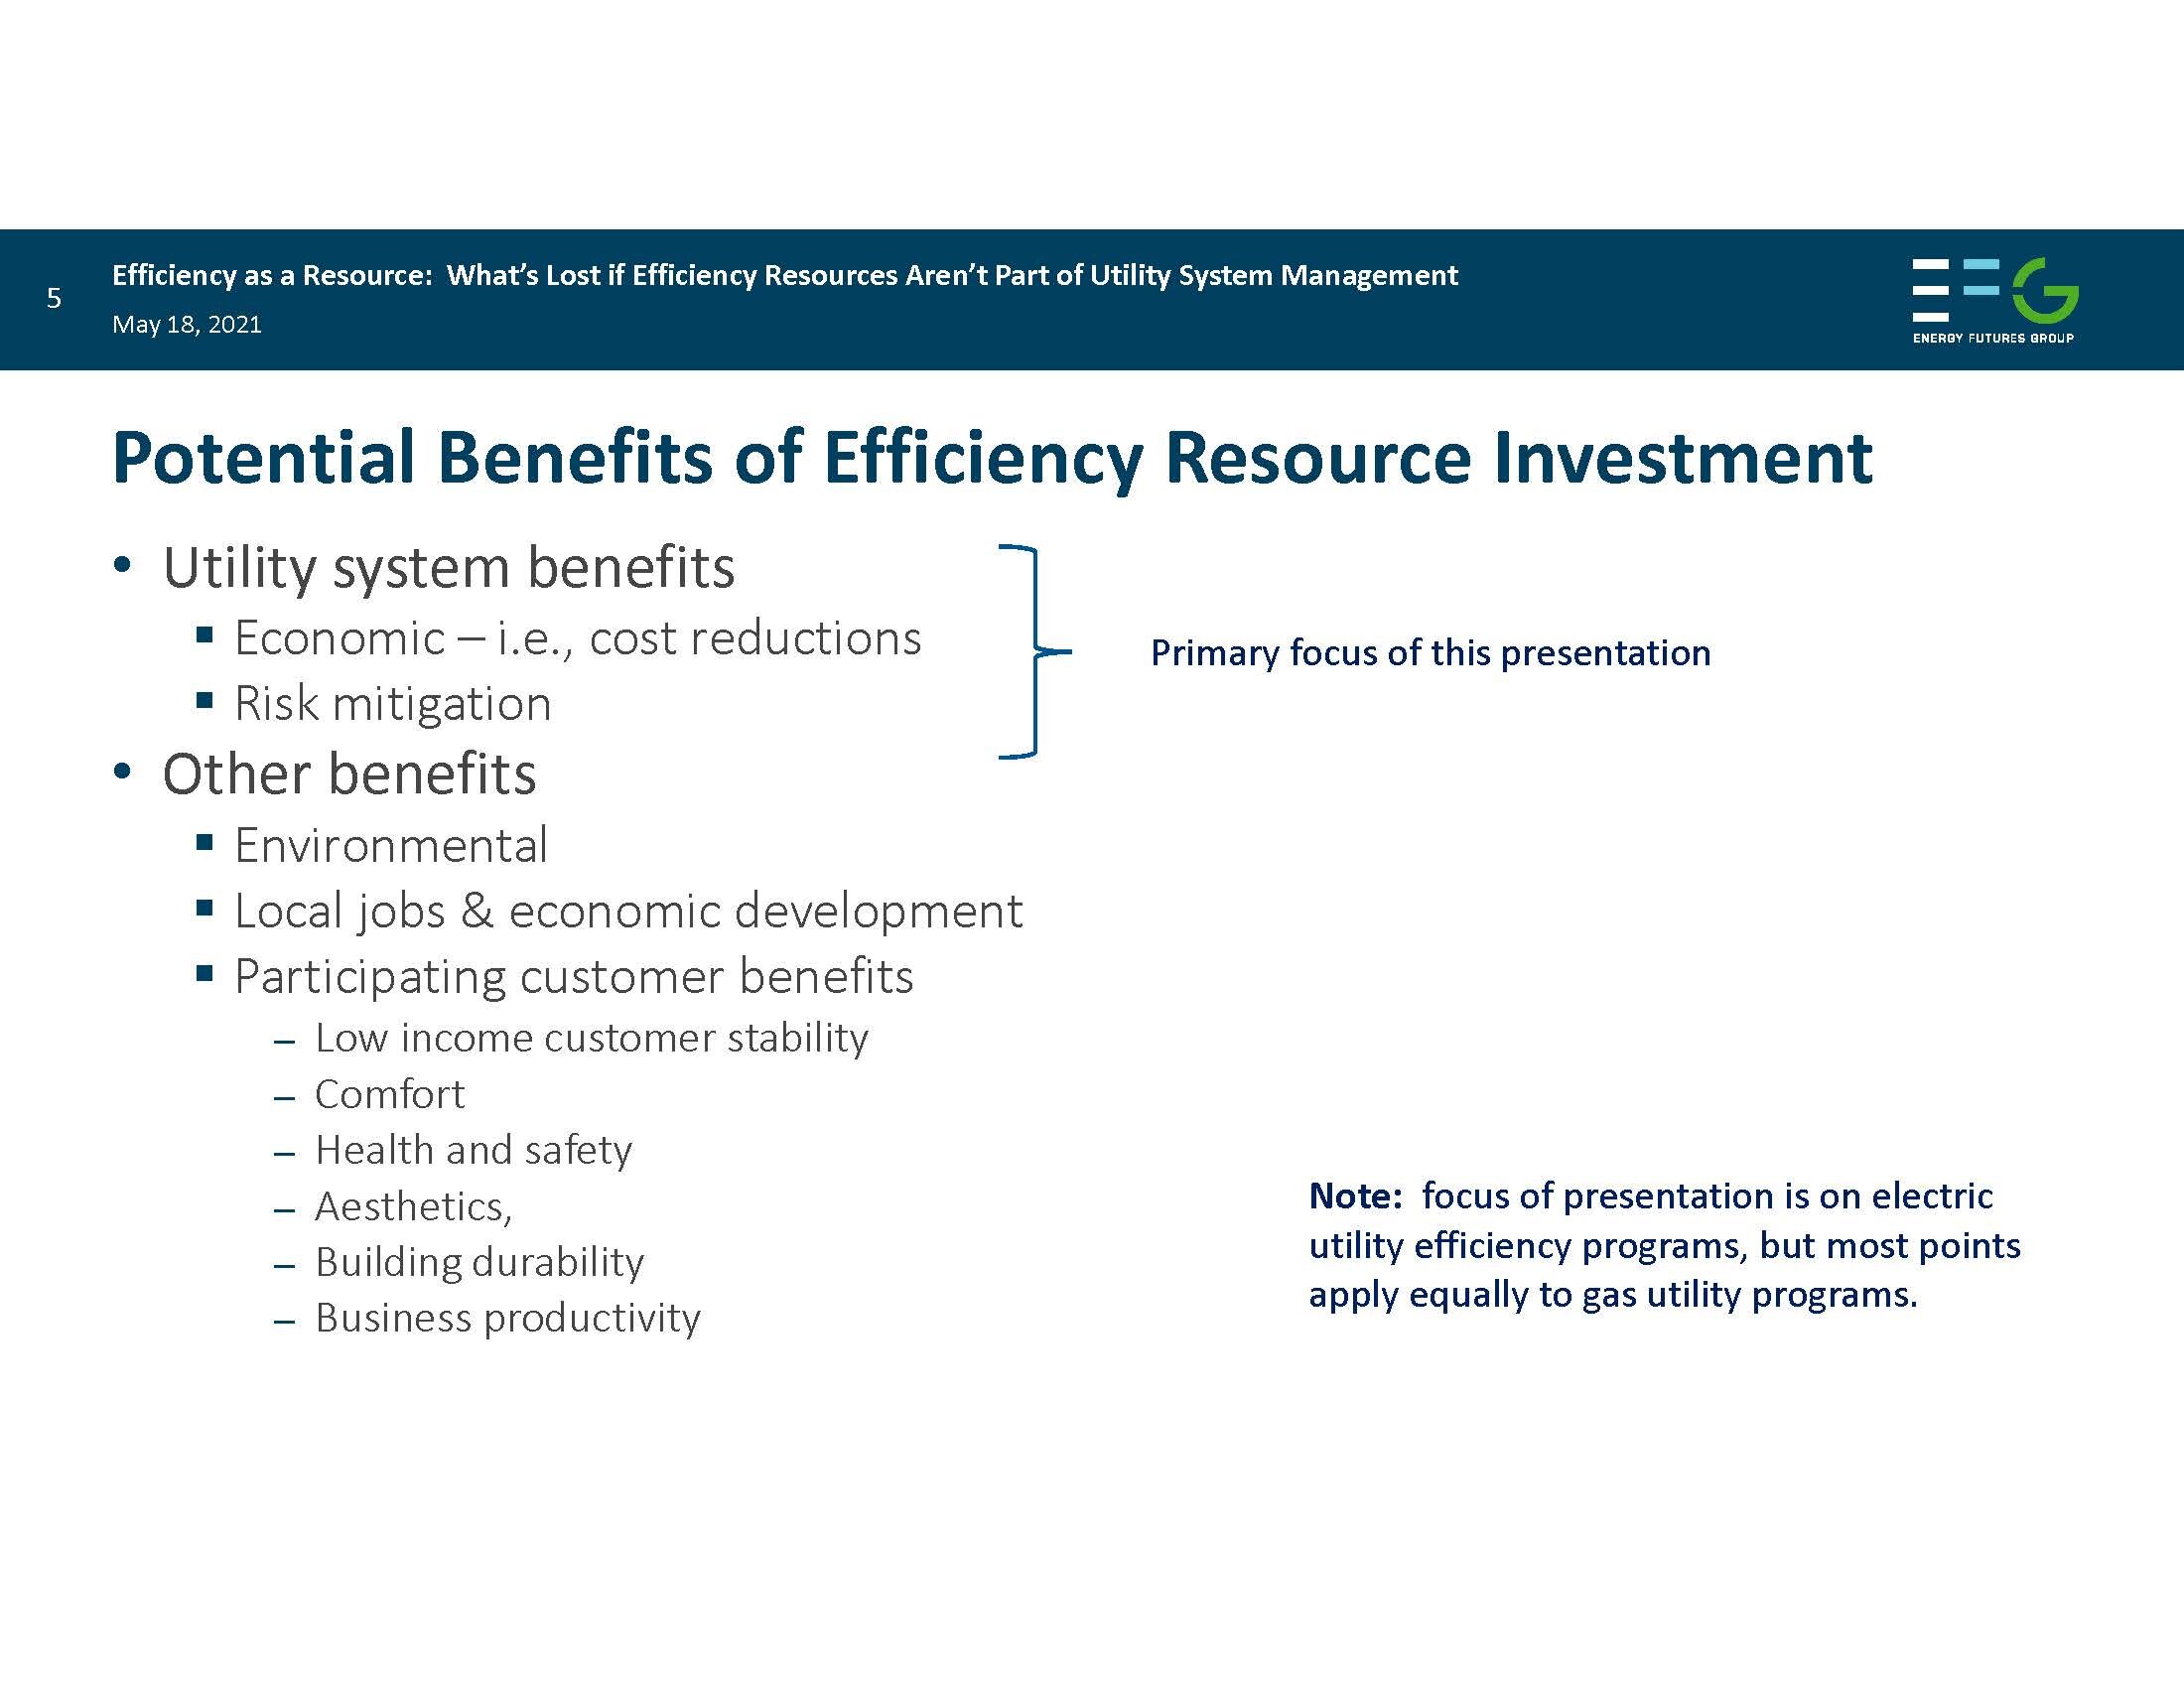 Energy Efficiency as a Resource Chris Neme Energy Futures_Page_05.jpg